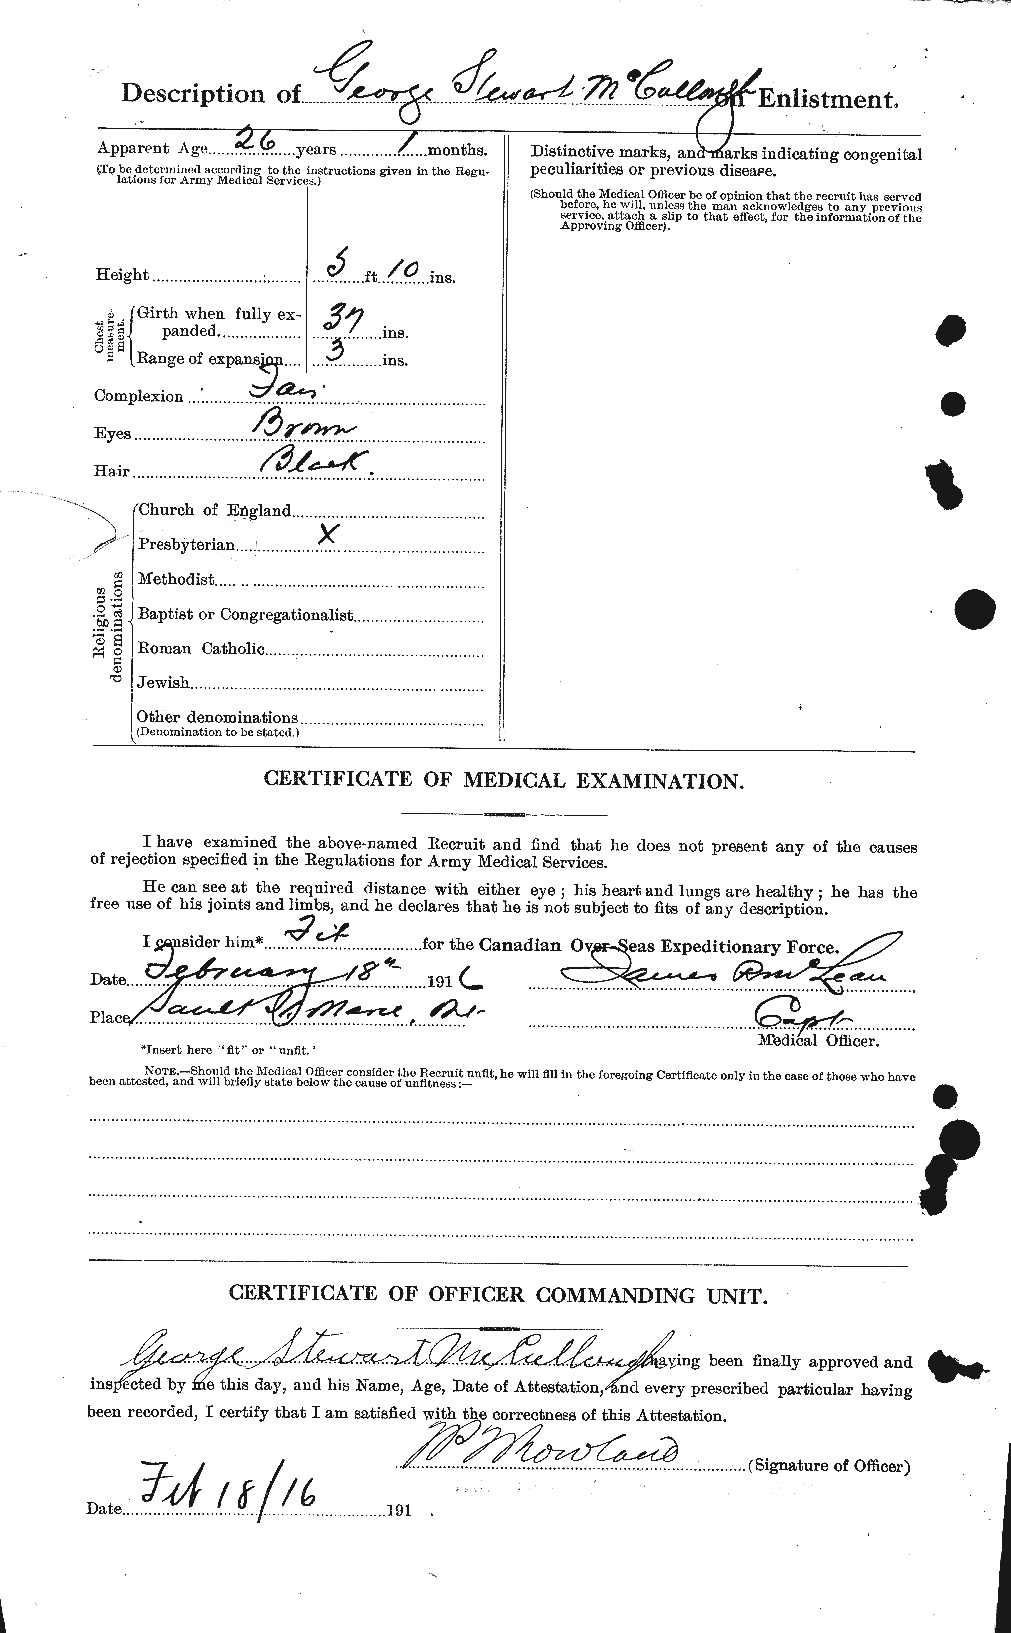 Personnel Records of the First World War - CEF 136950b